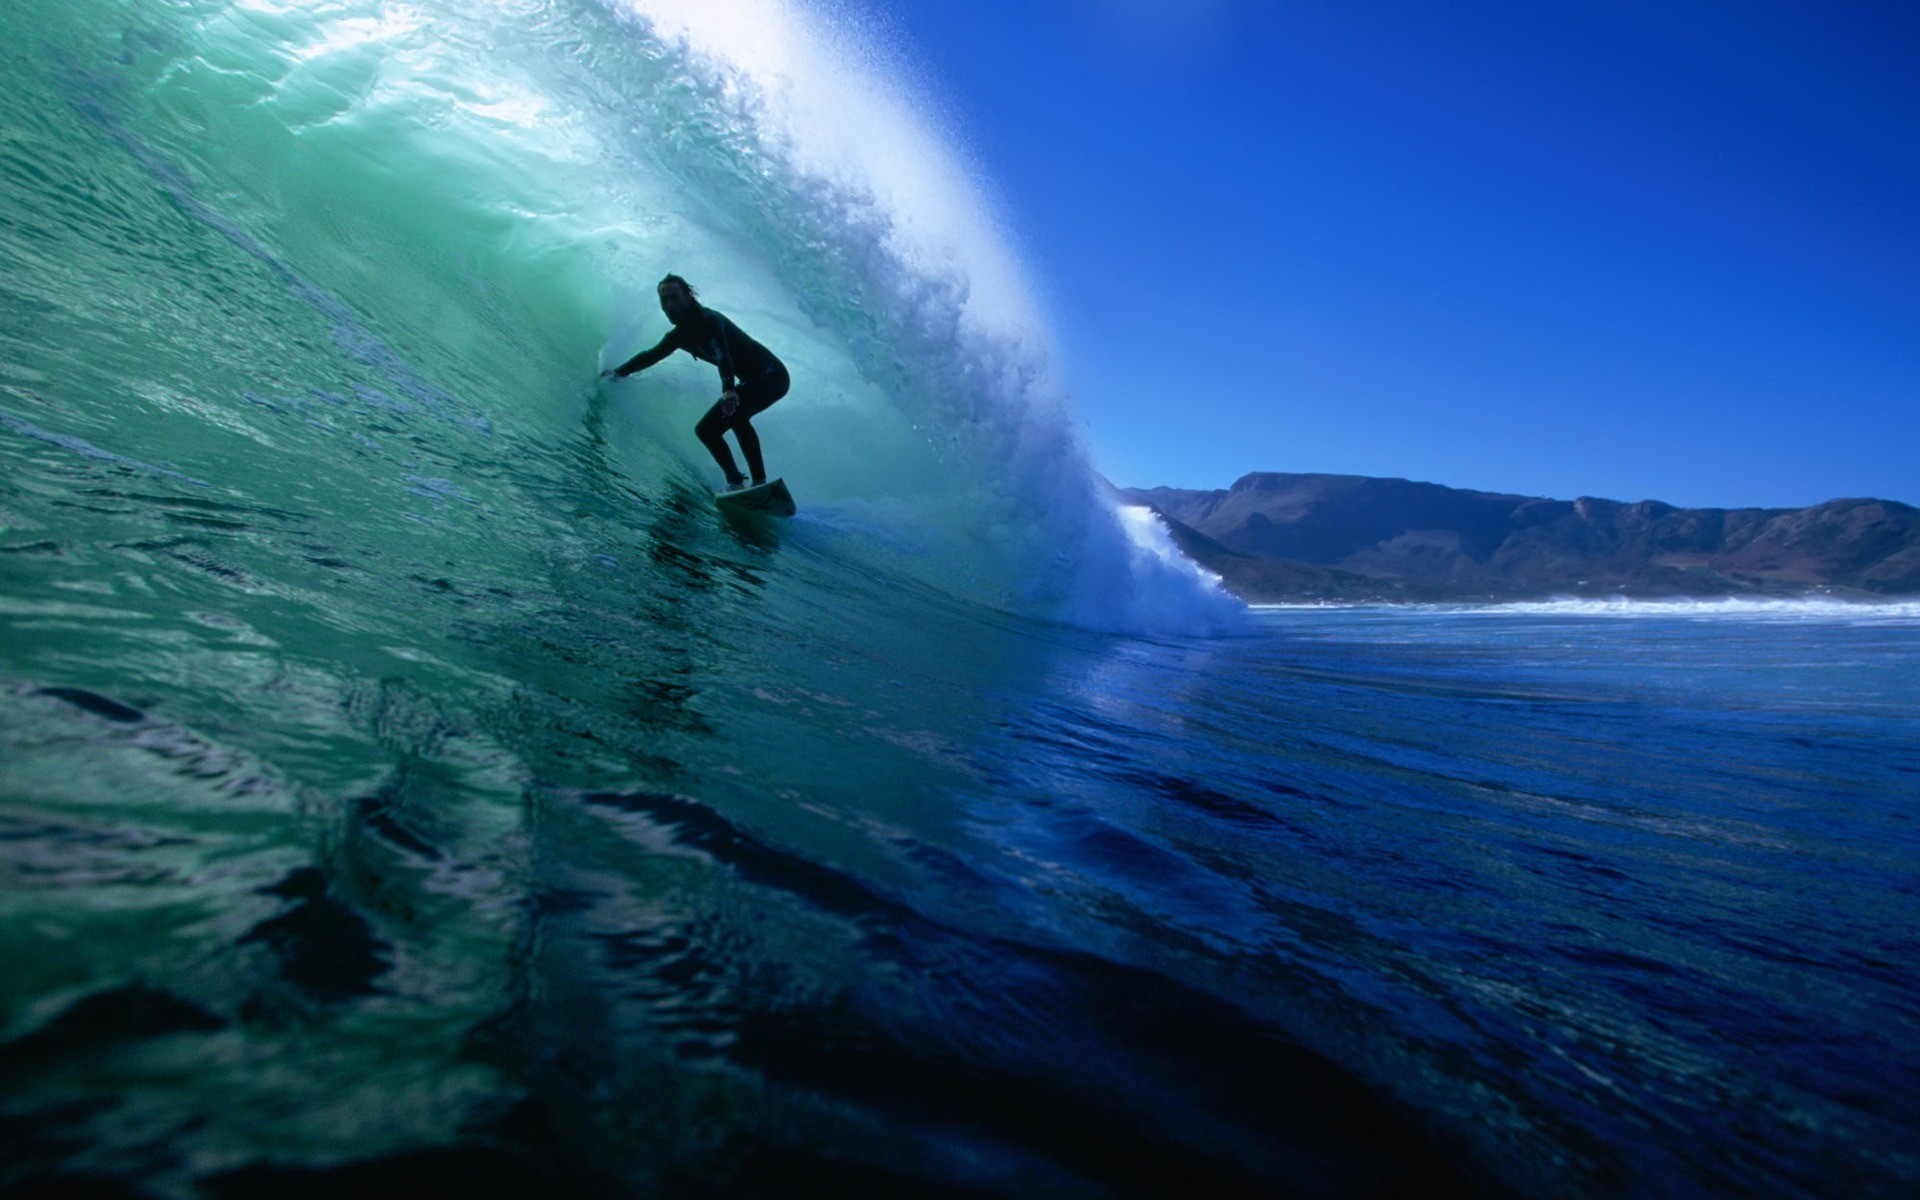 Stunning surfing wallpaper, perfect for sports enthusiasts.